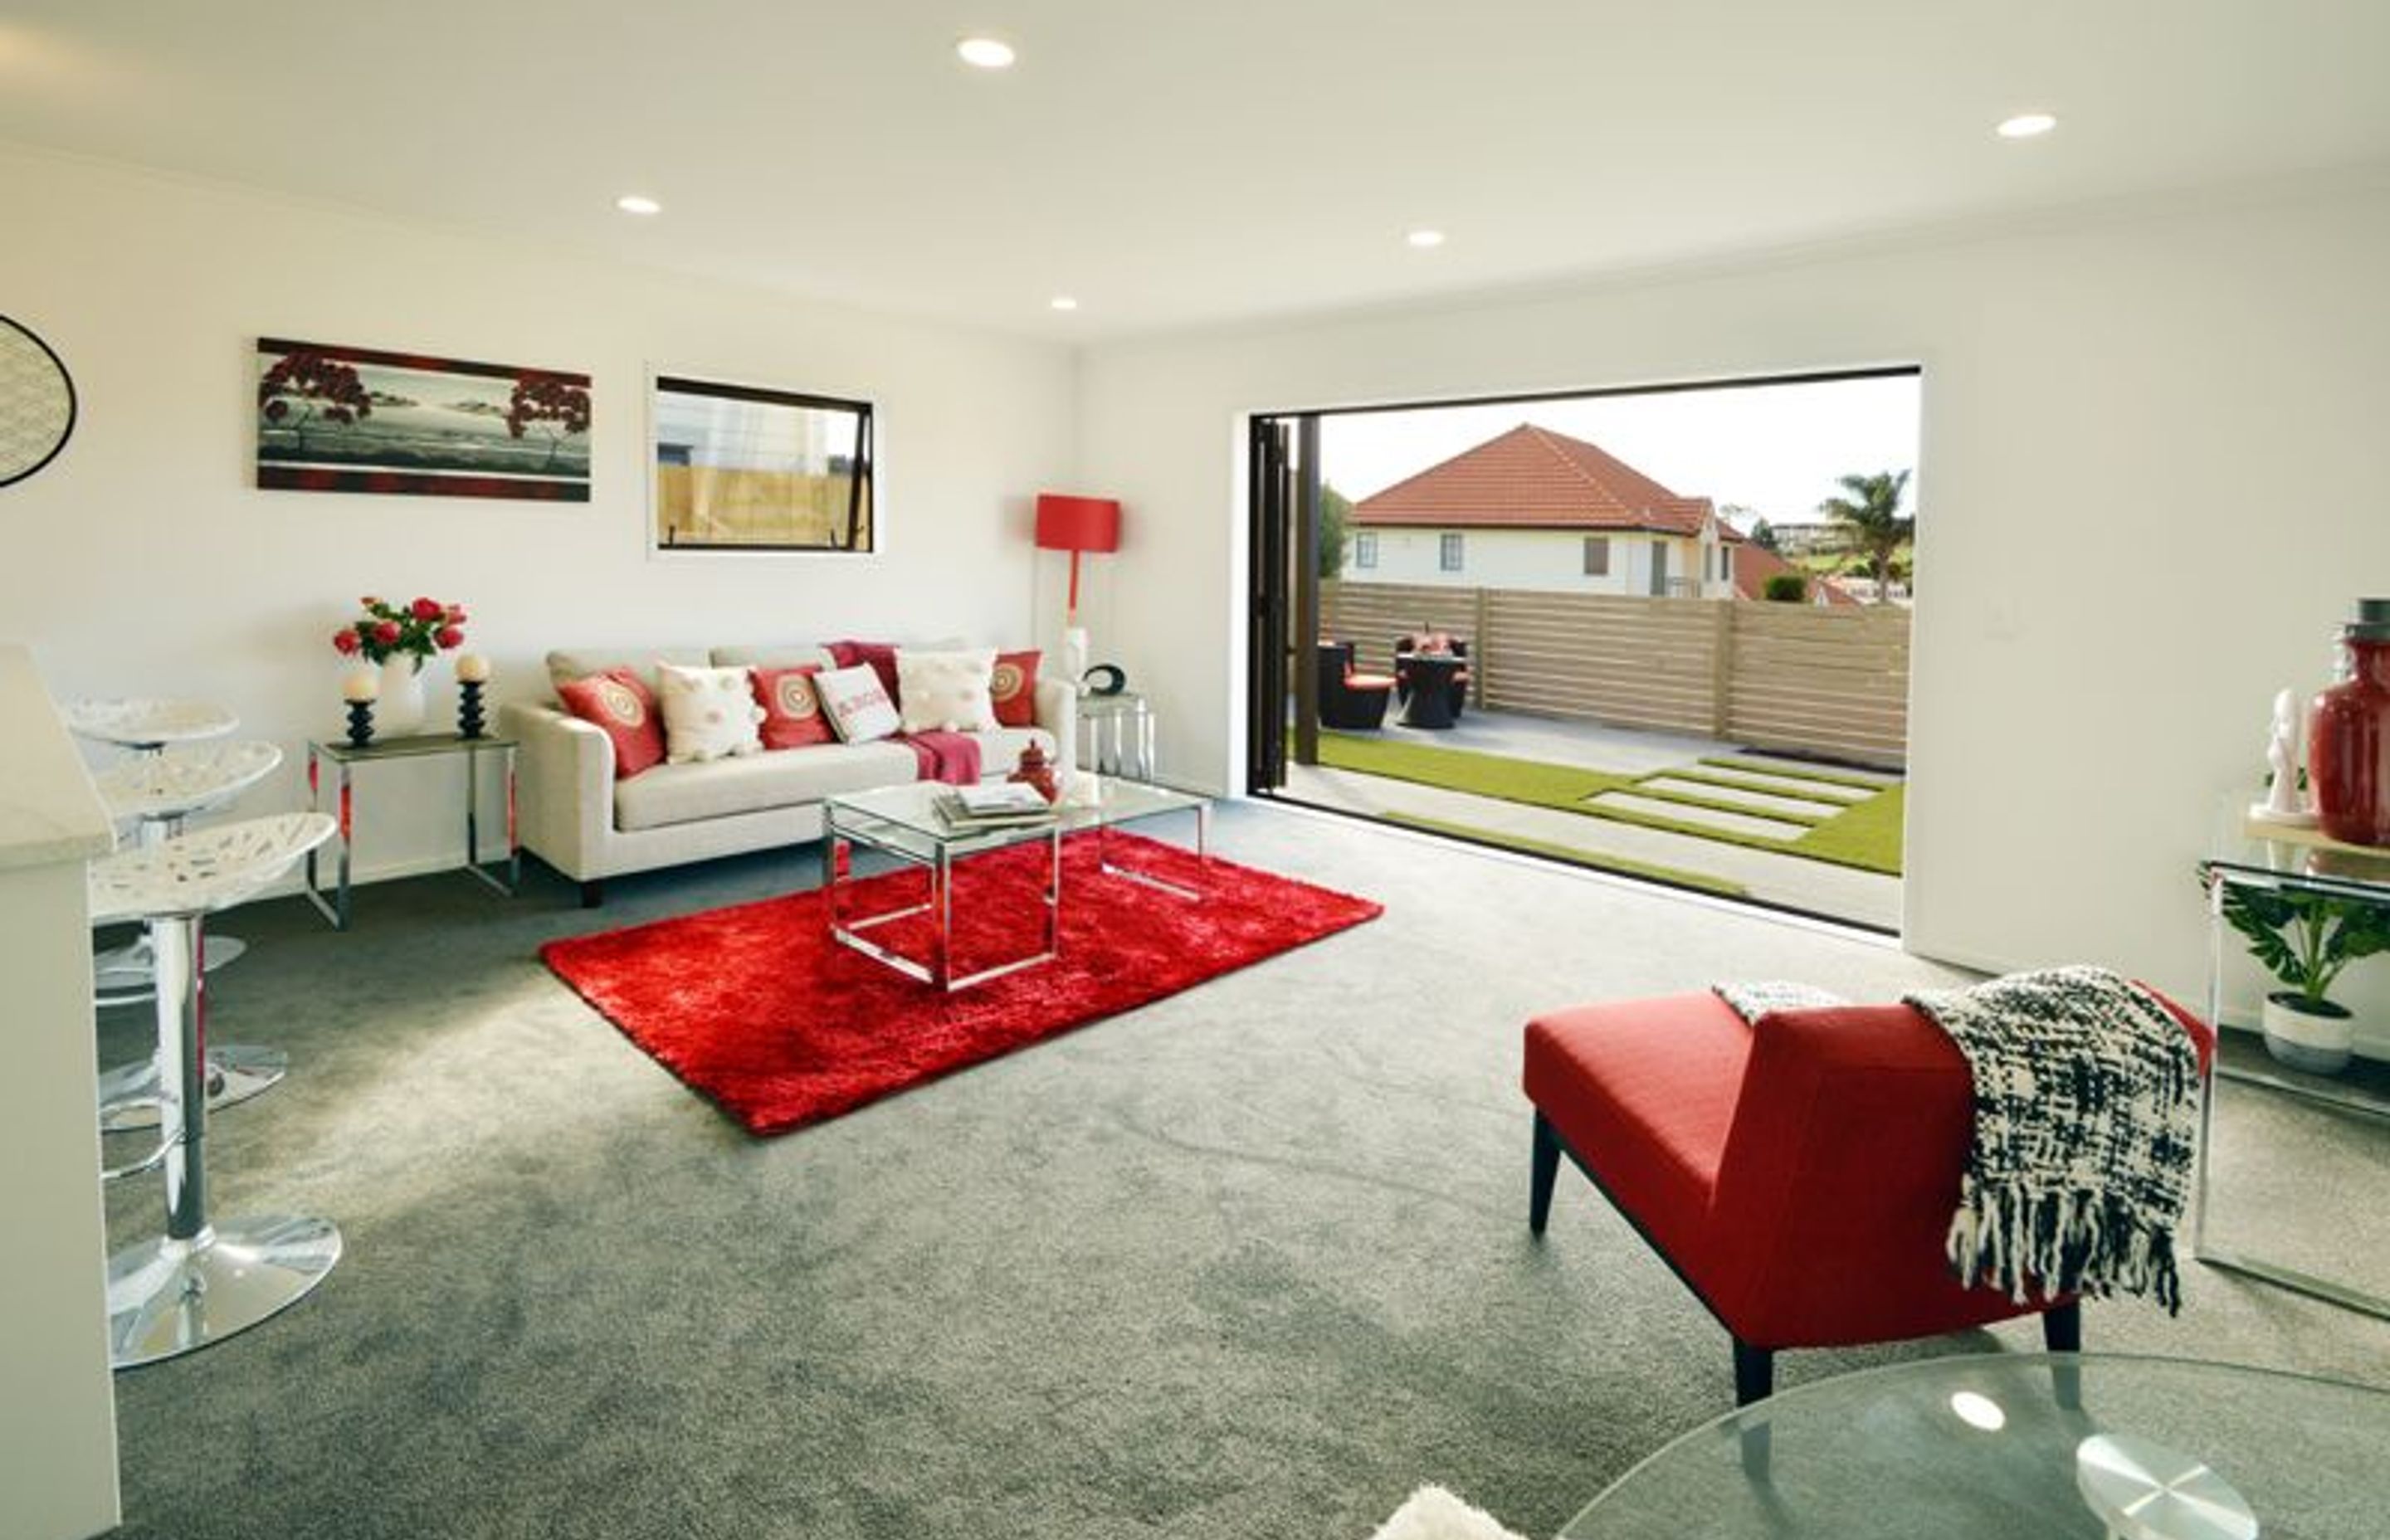 Living Area - Large open plan, living area with a modern feel and seamless flow